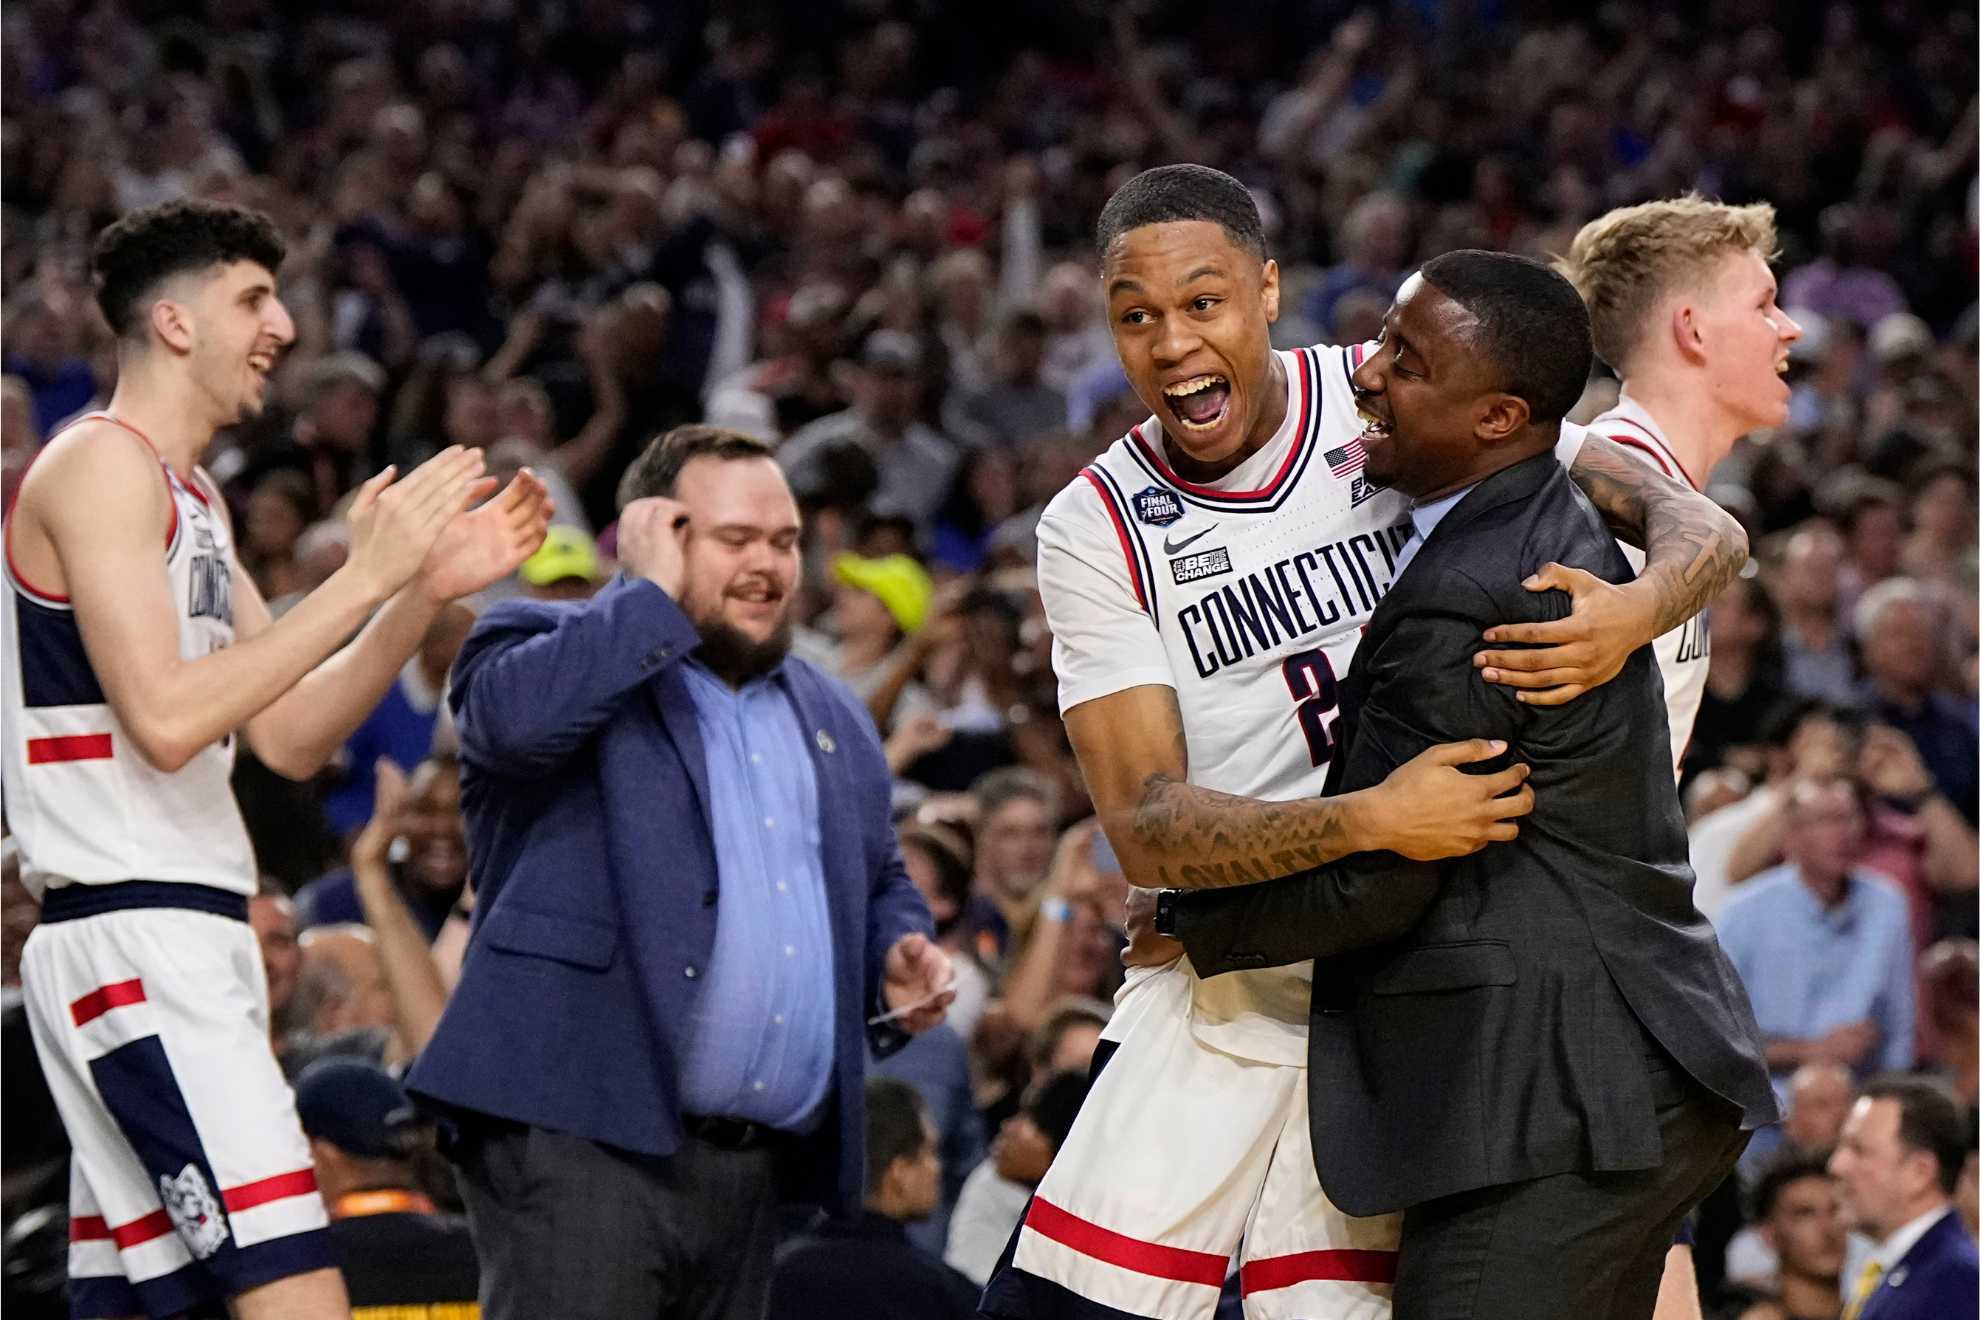 Connecticut guard Jordan Hawkins celebrates after the men's national championship college basketball game against San Diego State in the NCAA Tournament.